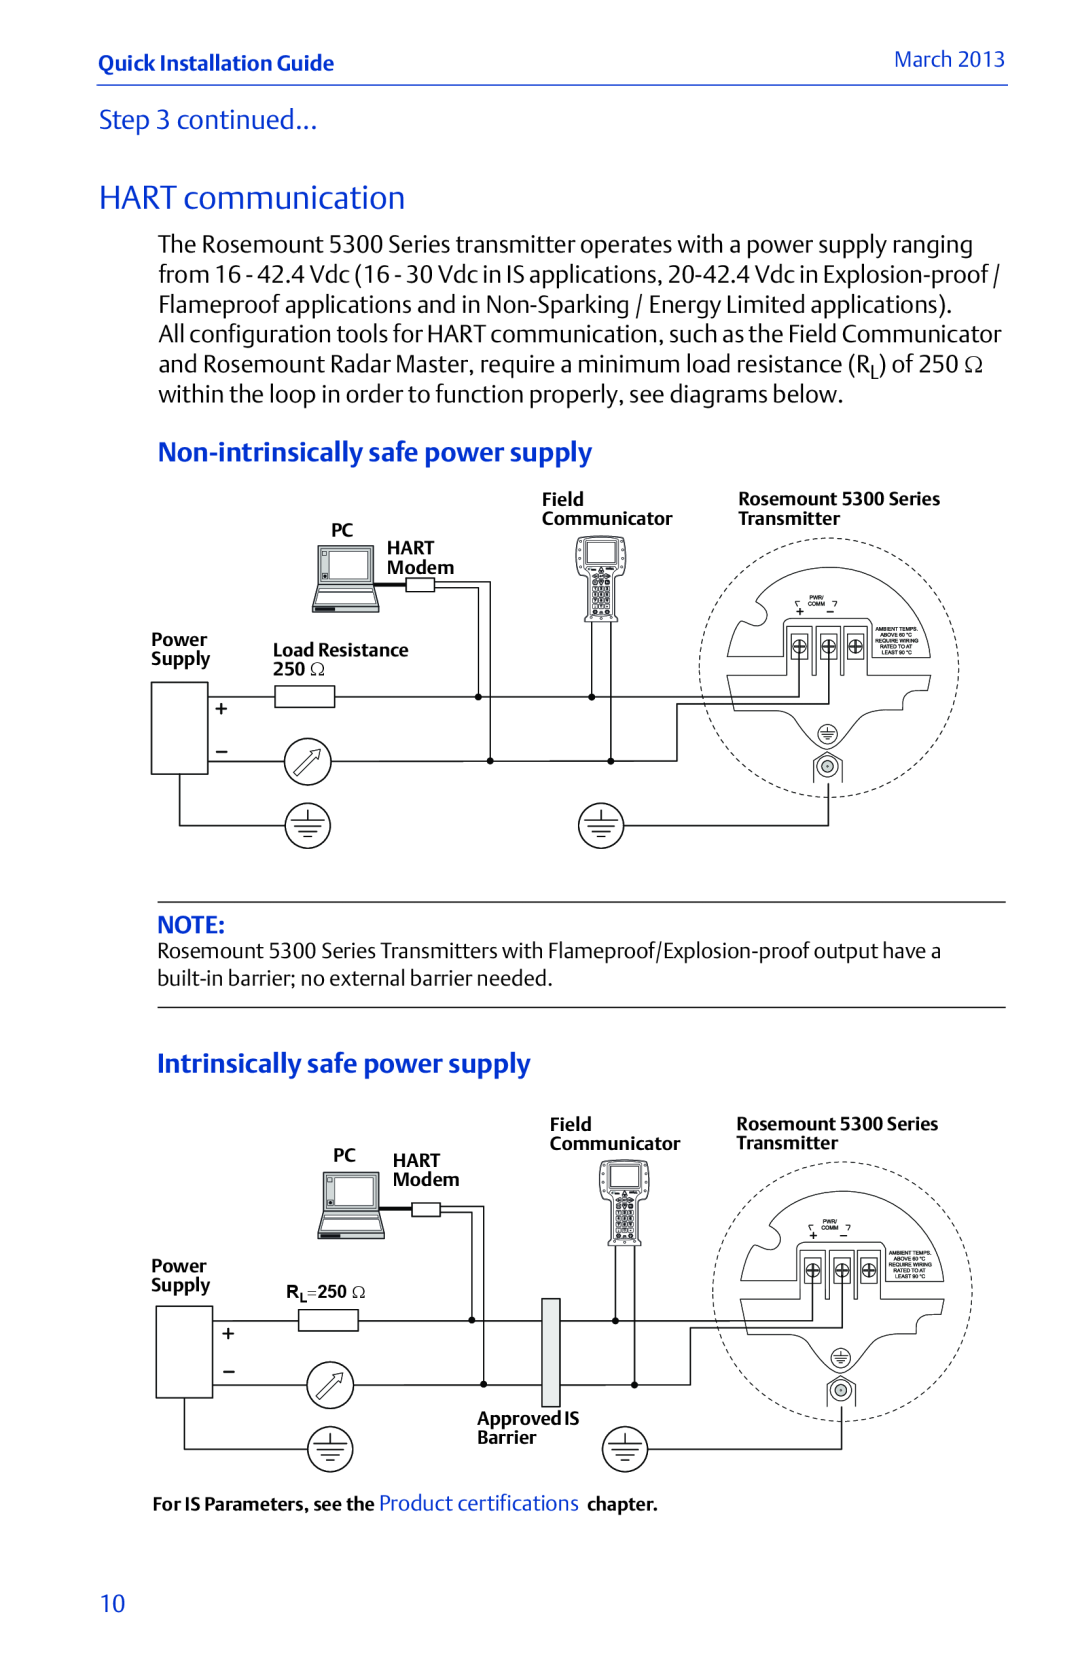 Emerson 00825-0100-4530 Rev EC HART communication, continued, Non-intrinsicallysafe power supply, Quick Installation Guide 